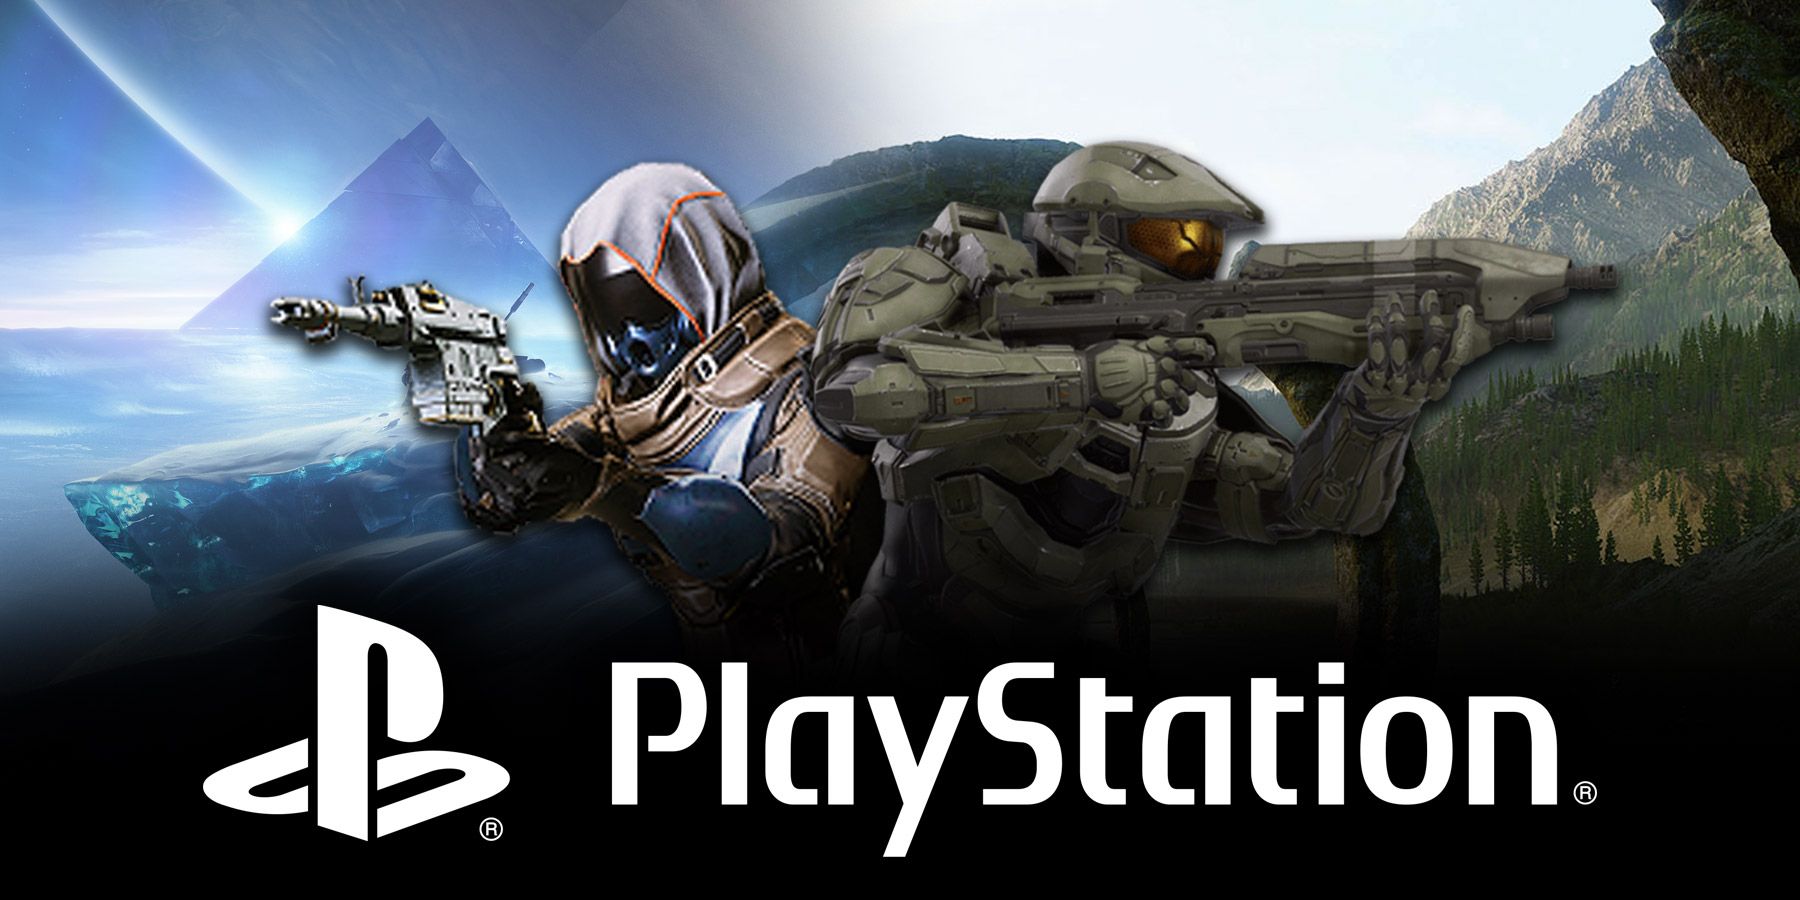 New Bungie FPS Playstation Needs